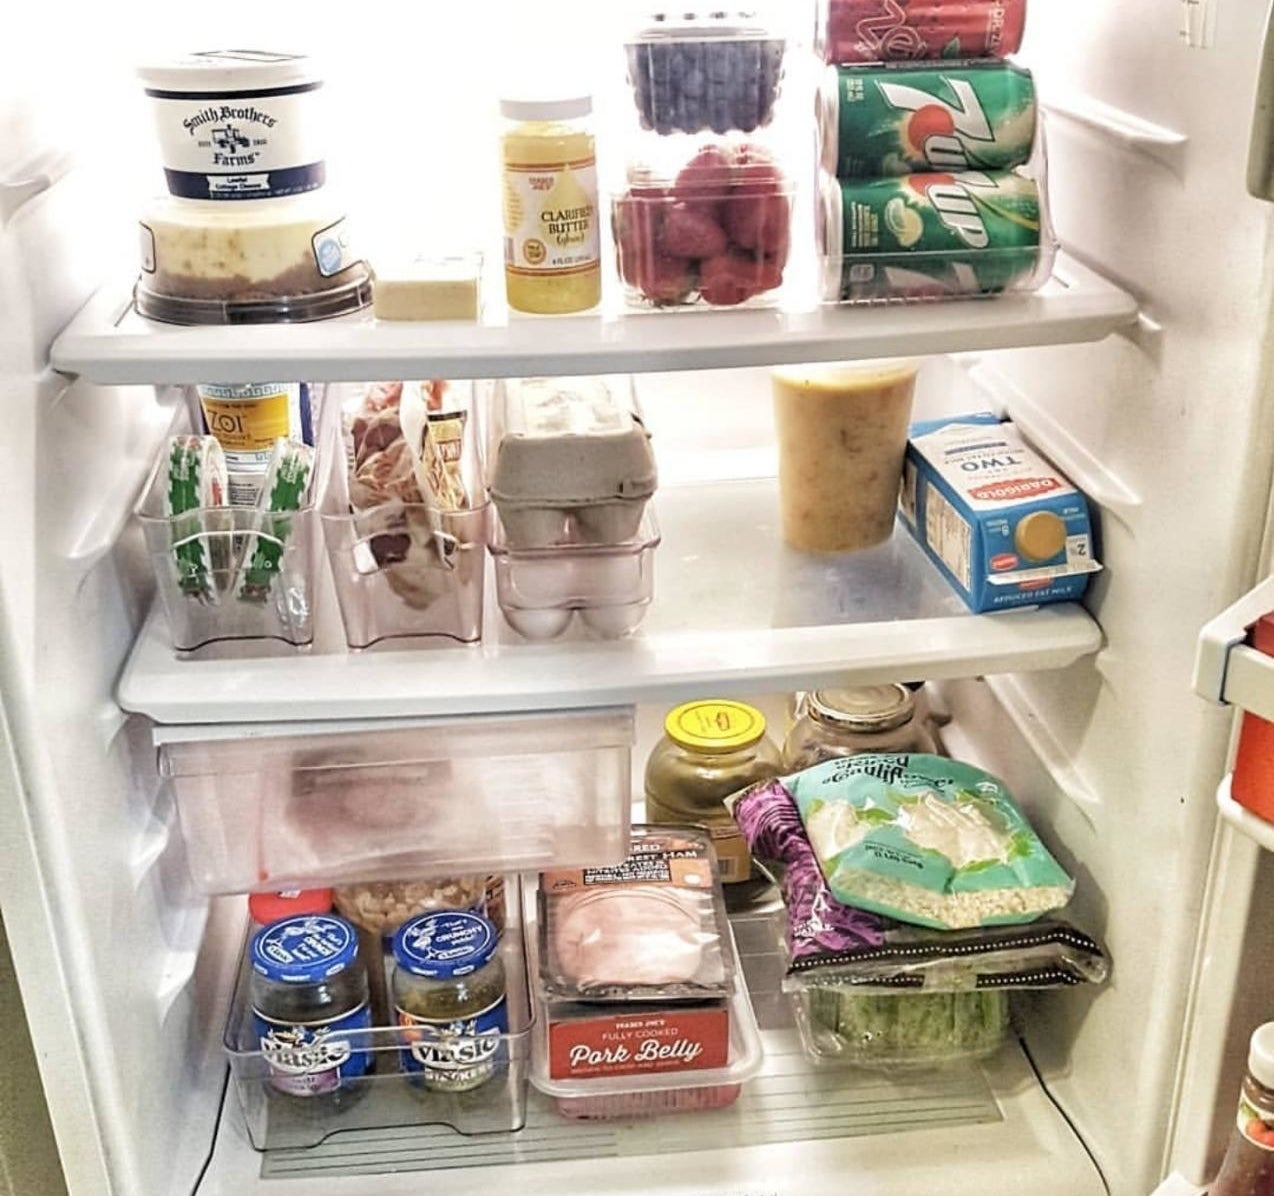 reviewer photo of a refrigerator with its contents neatly organized in clear bins